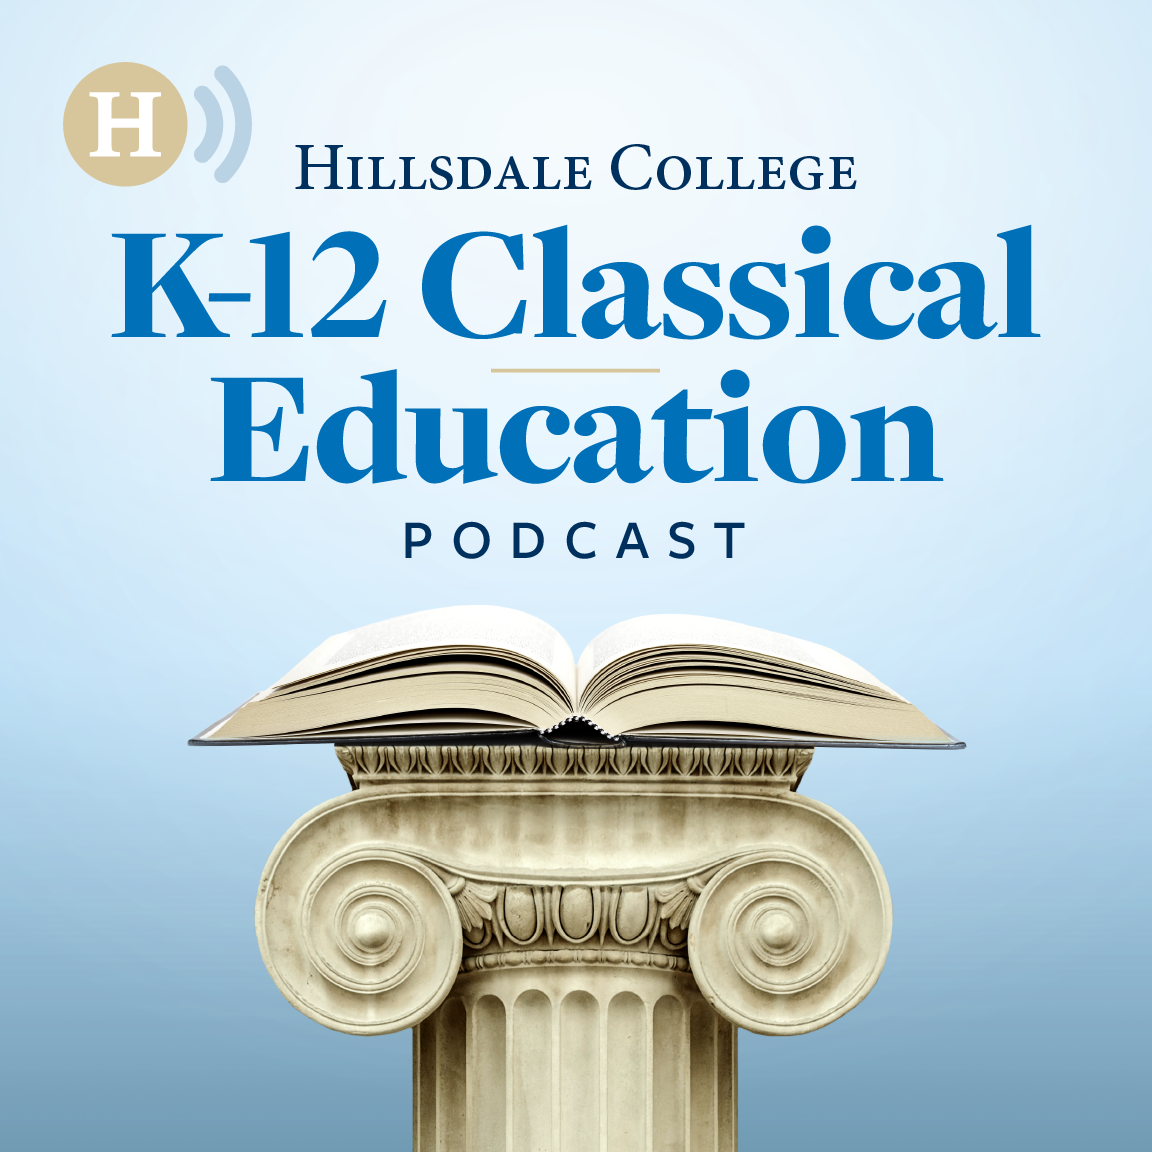 Eric Stennett: Transitioning from Public to Classical Education